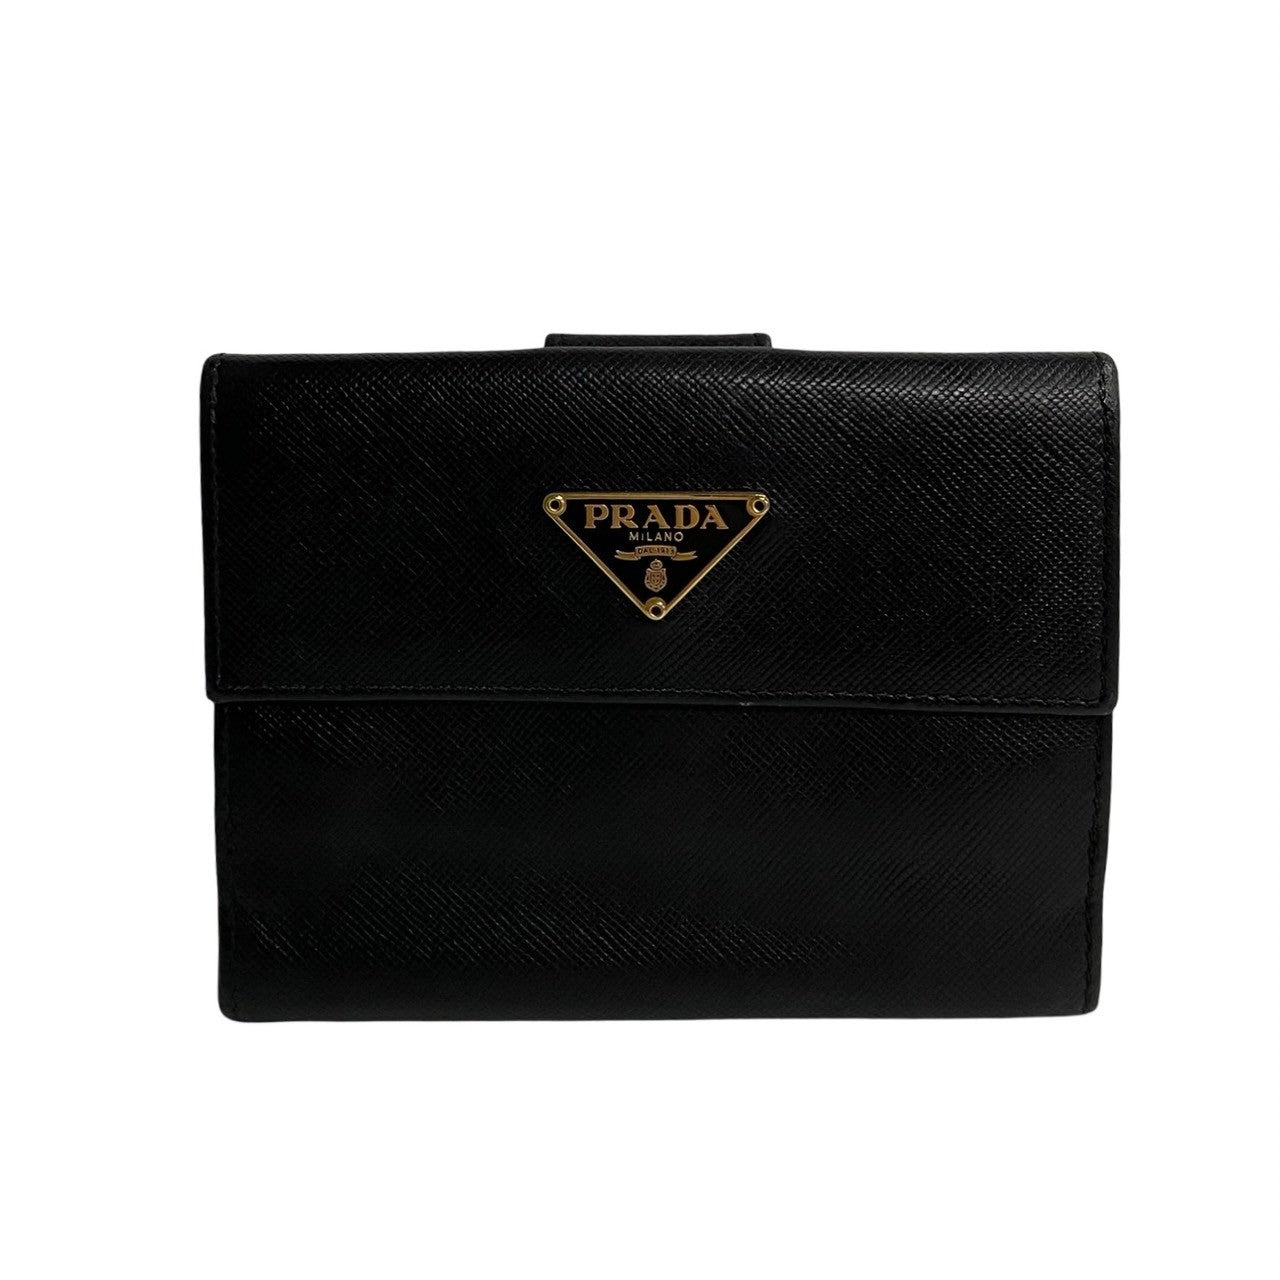 Prada Saffiano Leather Bifold Wallet Leather Short Wallet in Good condition